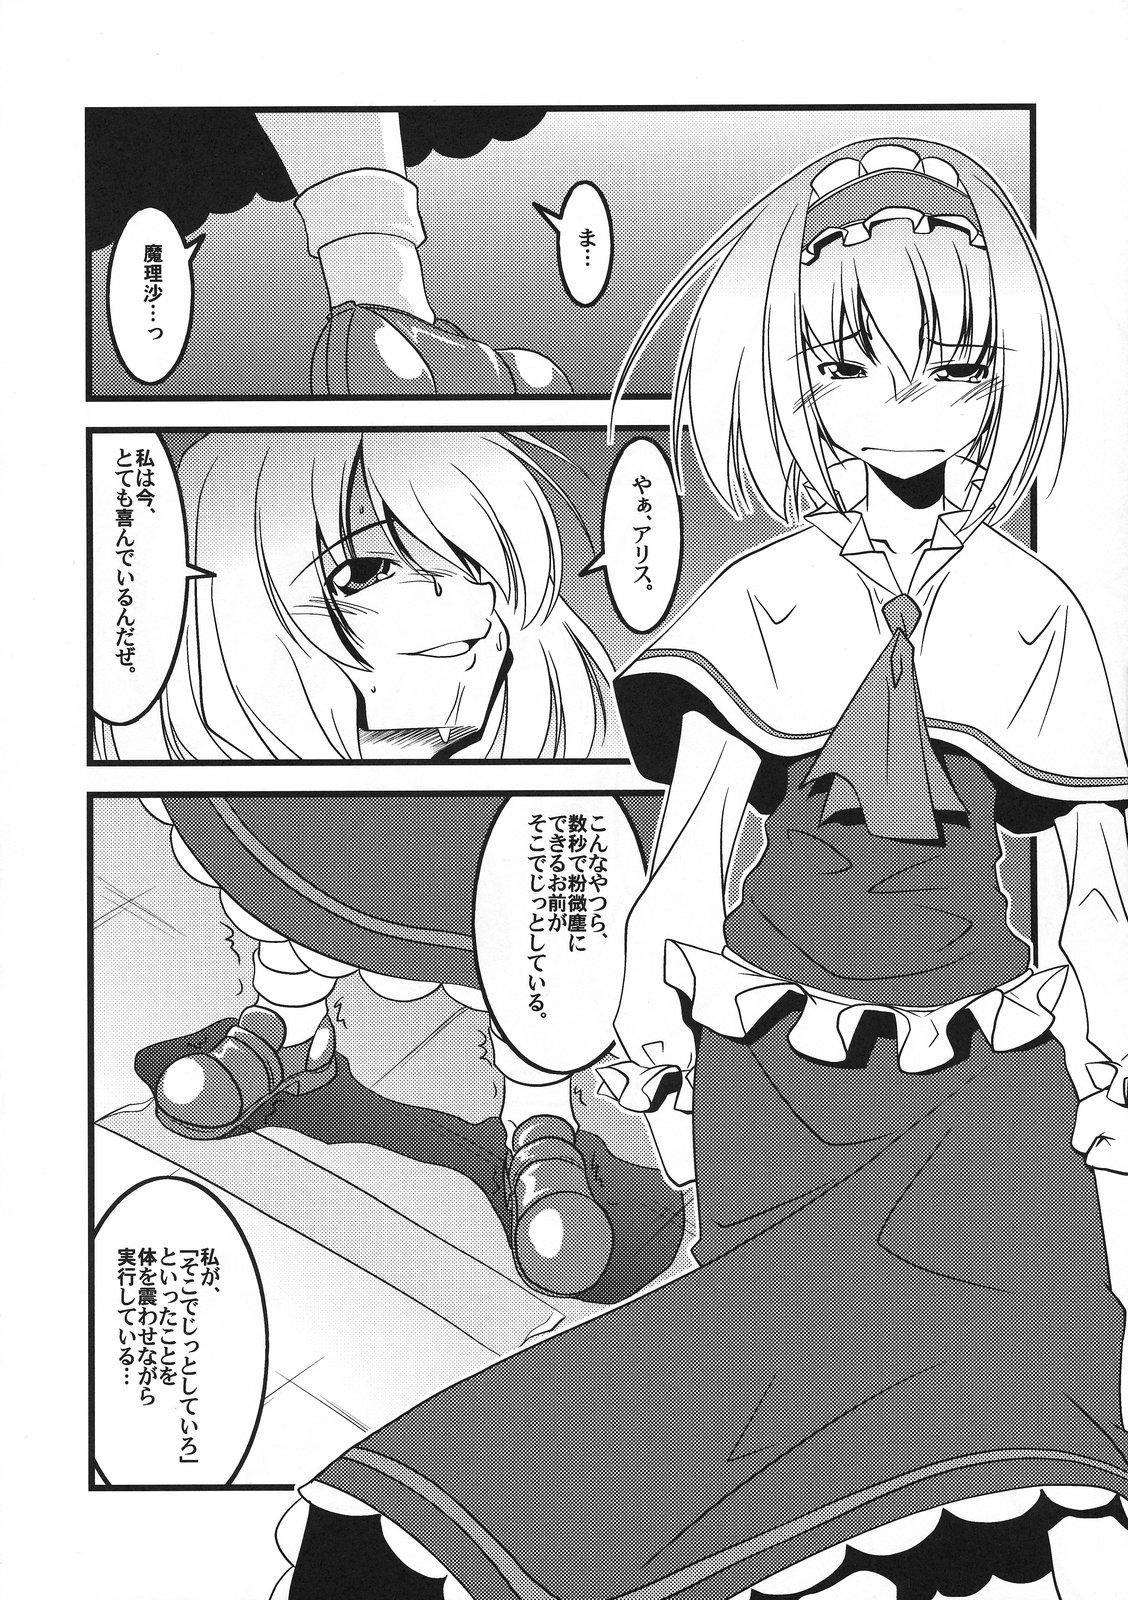 Gay Outdoors 恋虐／虐恋 - Touhou project Cumshot - Page 6